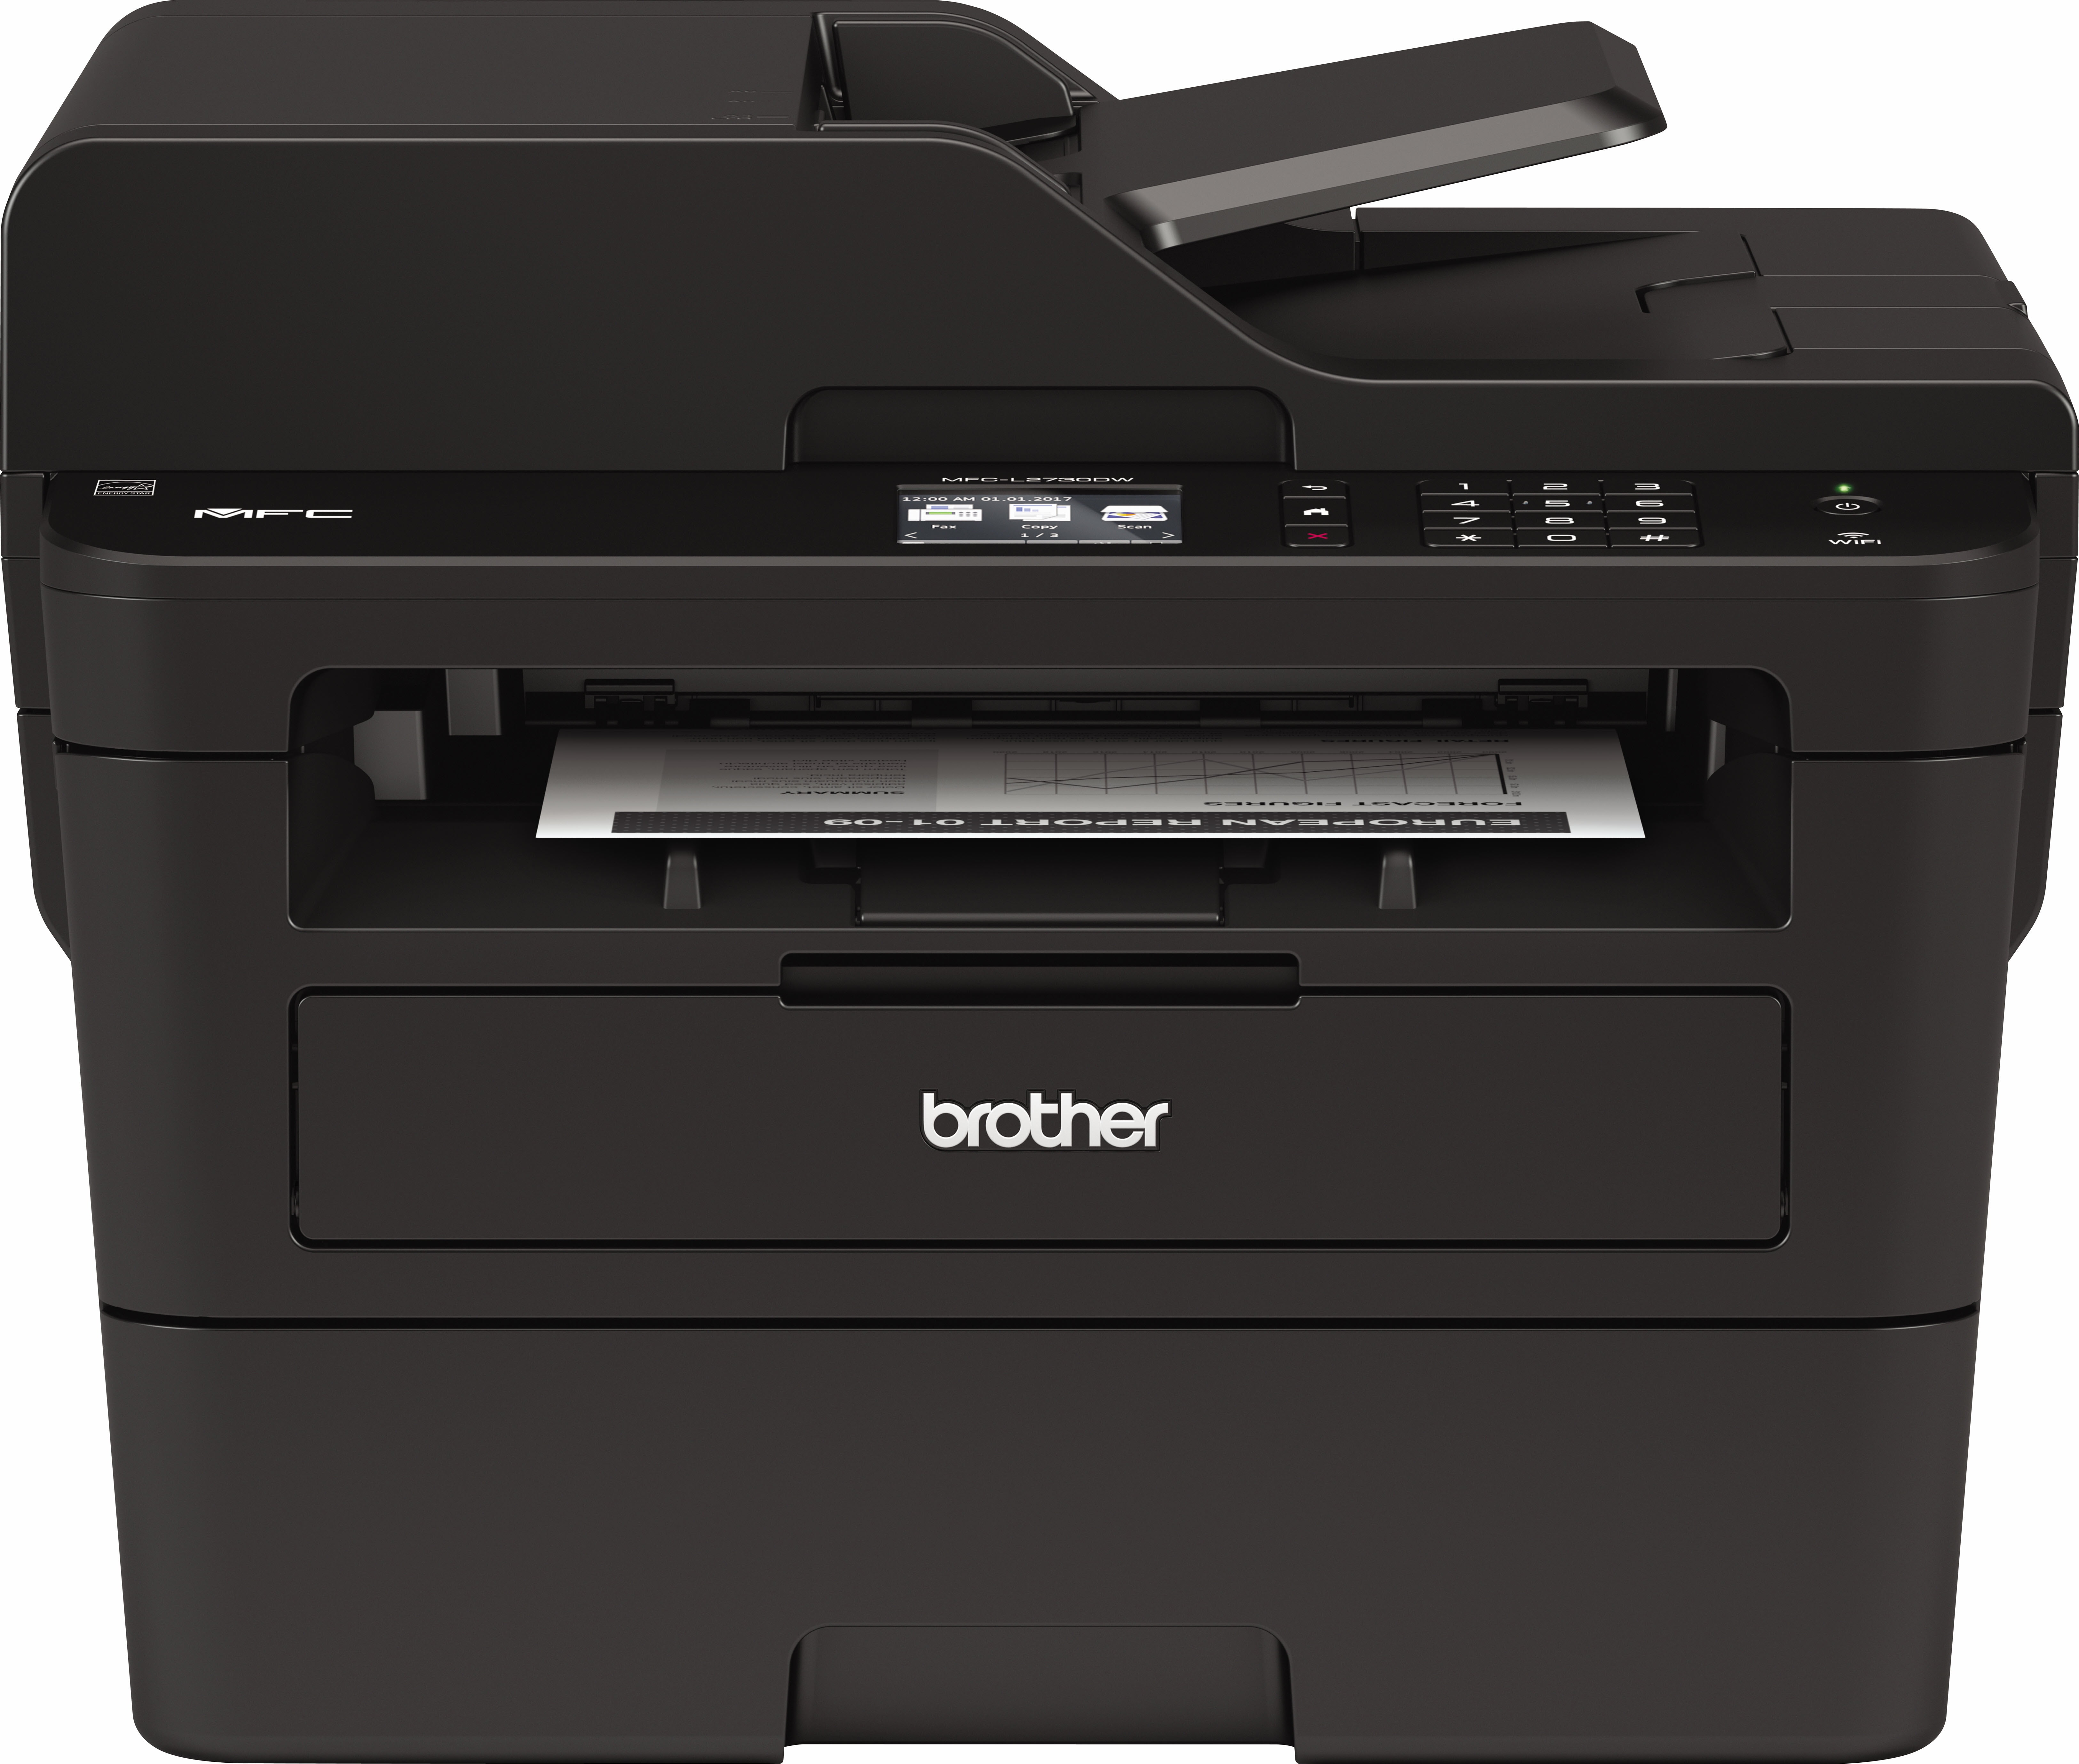 Brother MFC-L3730CDN Multifunctional LED Printer - Colour Printing